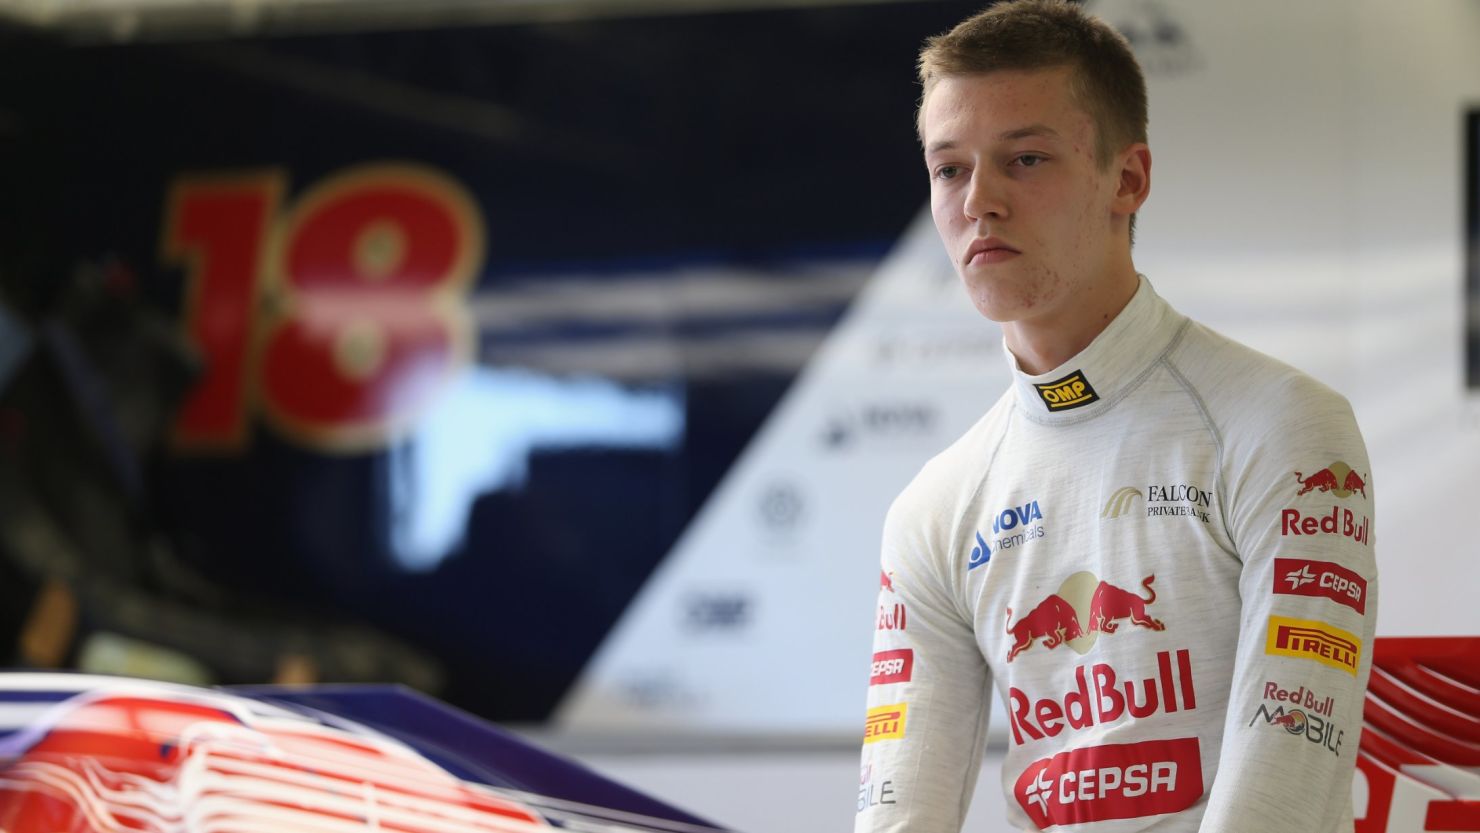  Daniil Kvyat will race for Torro Rosso in 2014 after being confirmed as the team's new driver